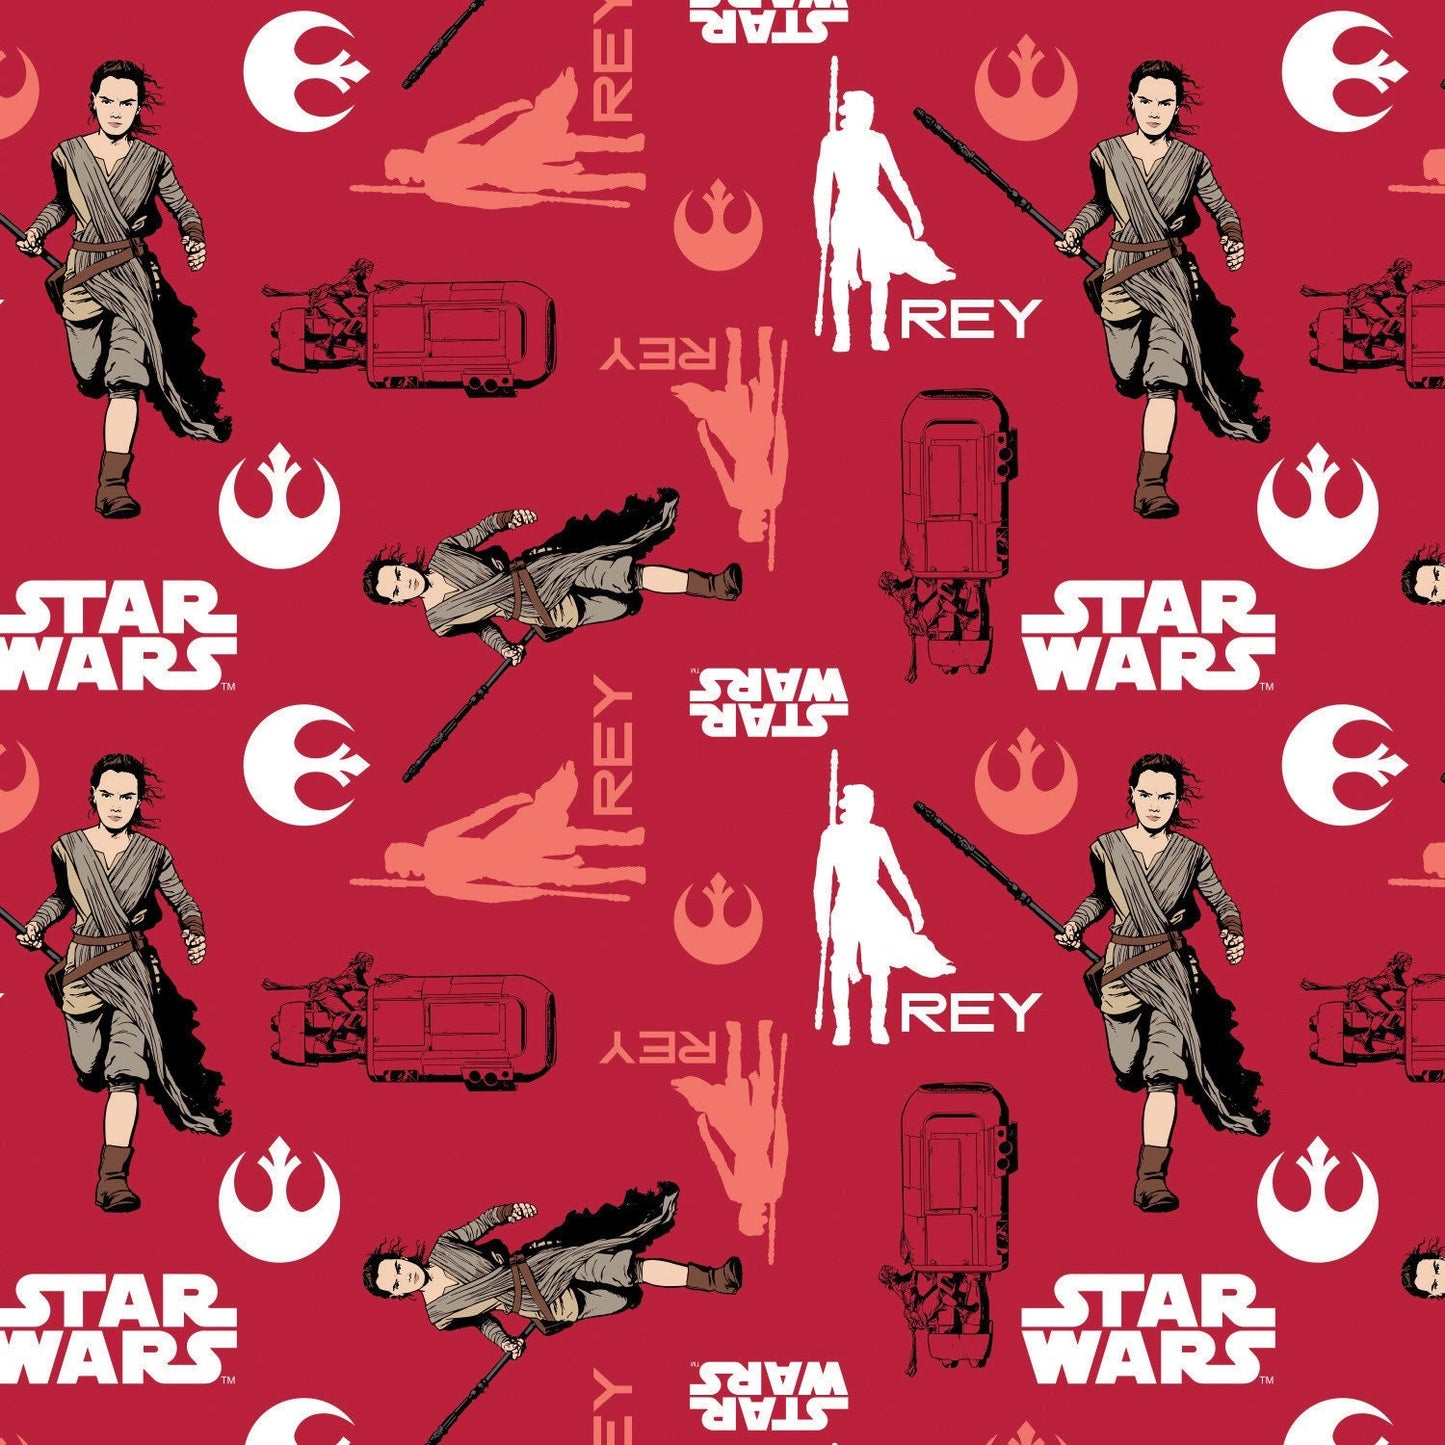 Star Wars, The Force Awakens Ruby Cotton Woven Fabric 7360104  03